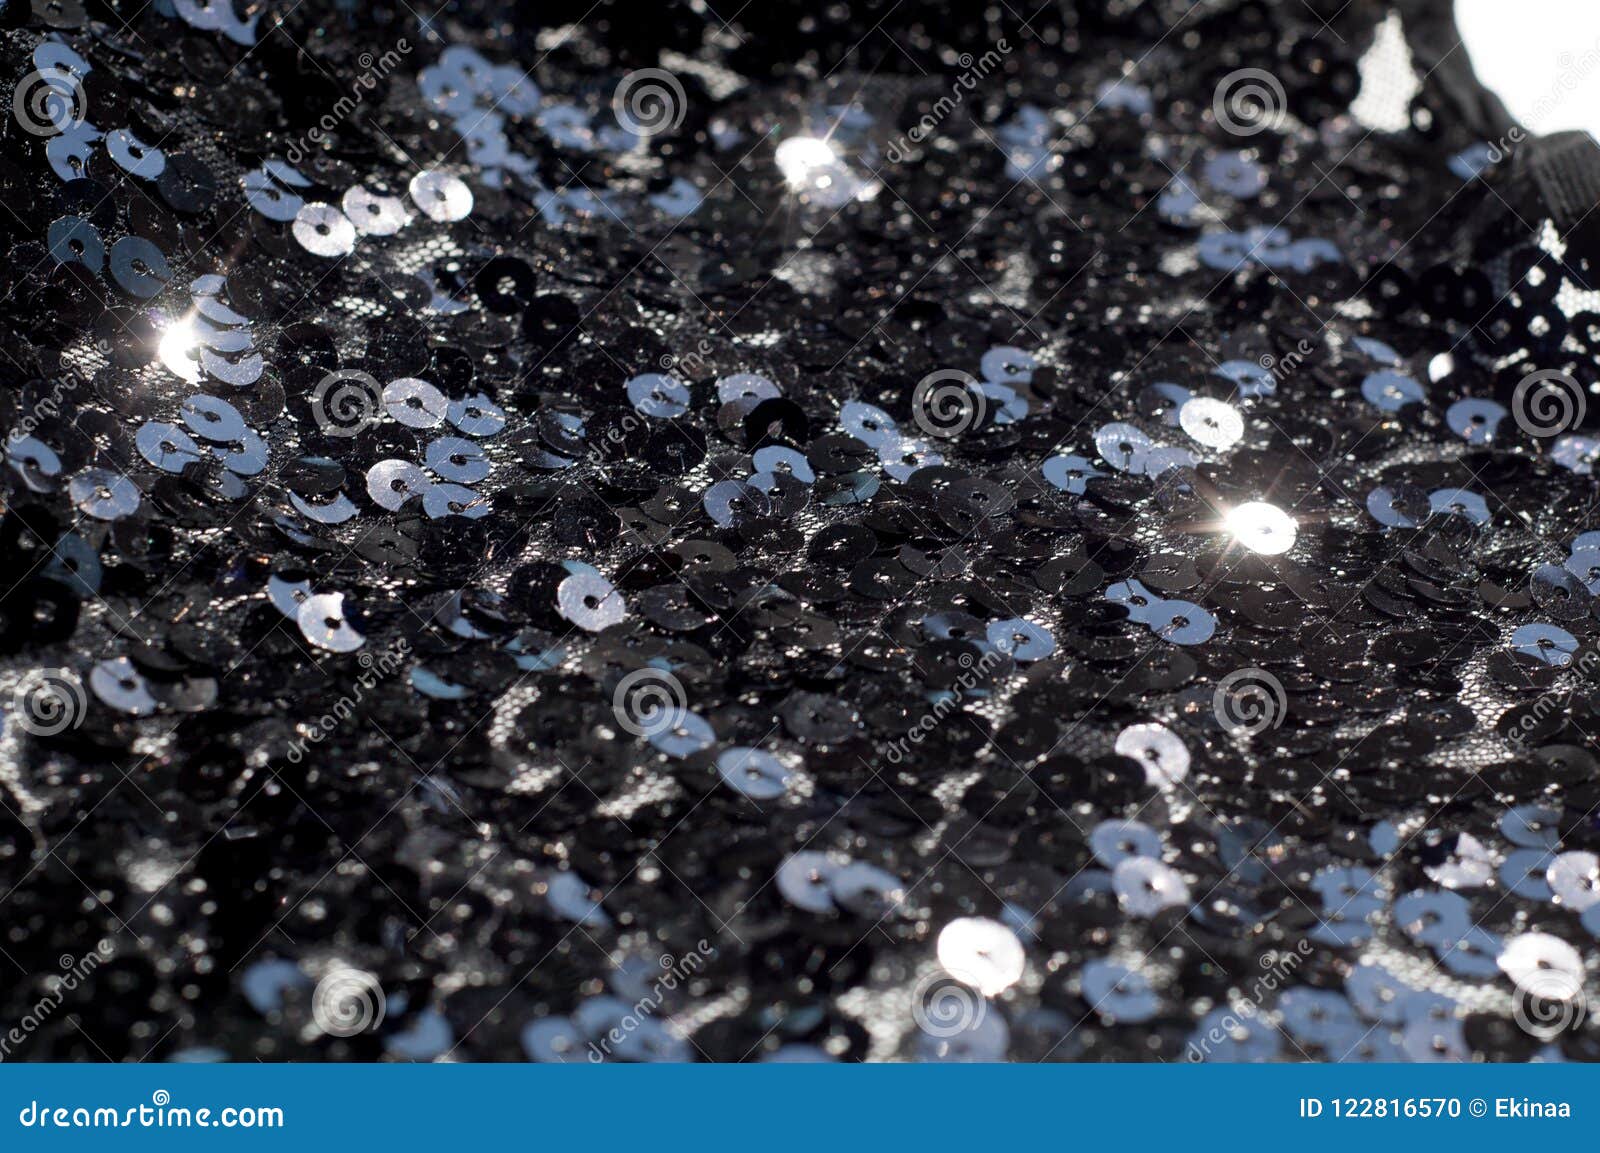 fabric texture, background, black sequined